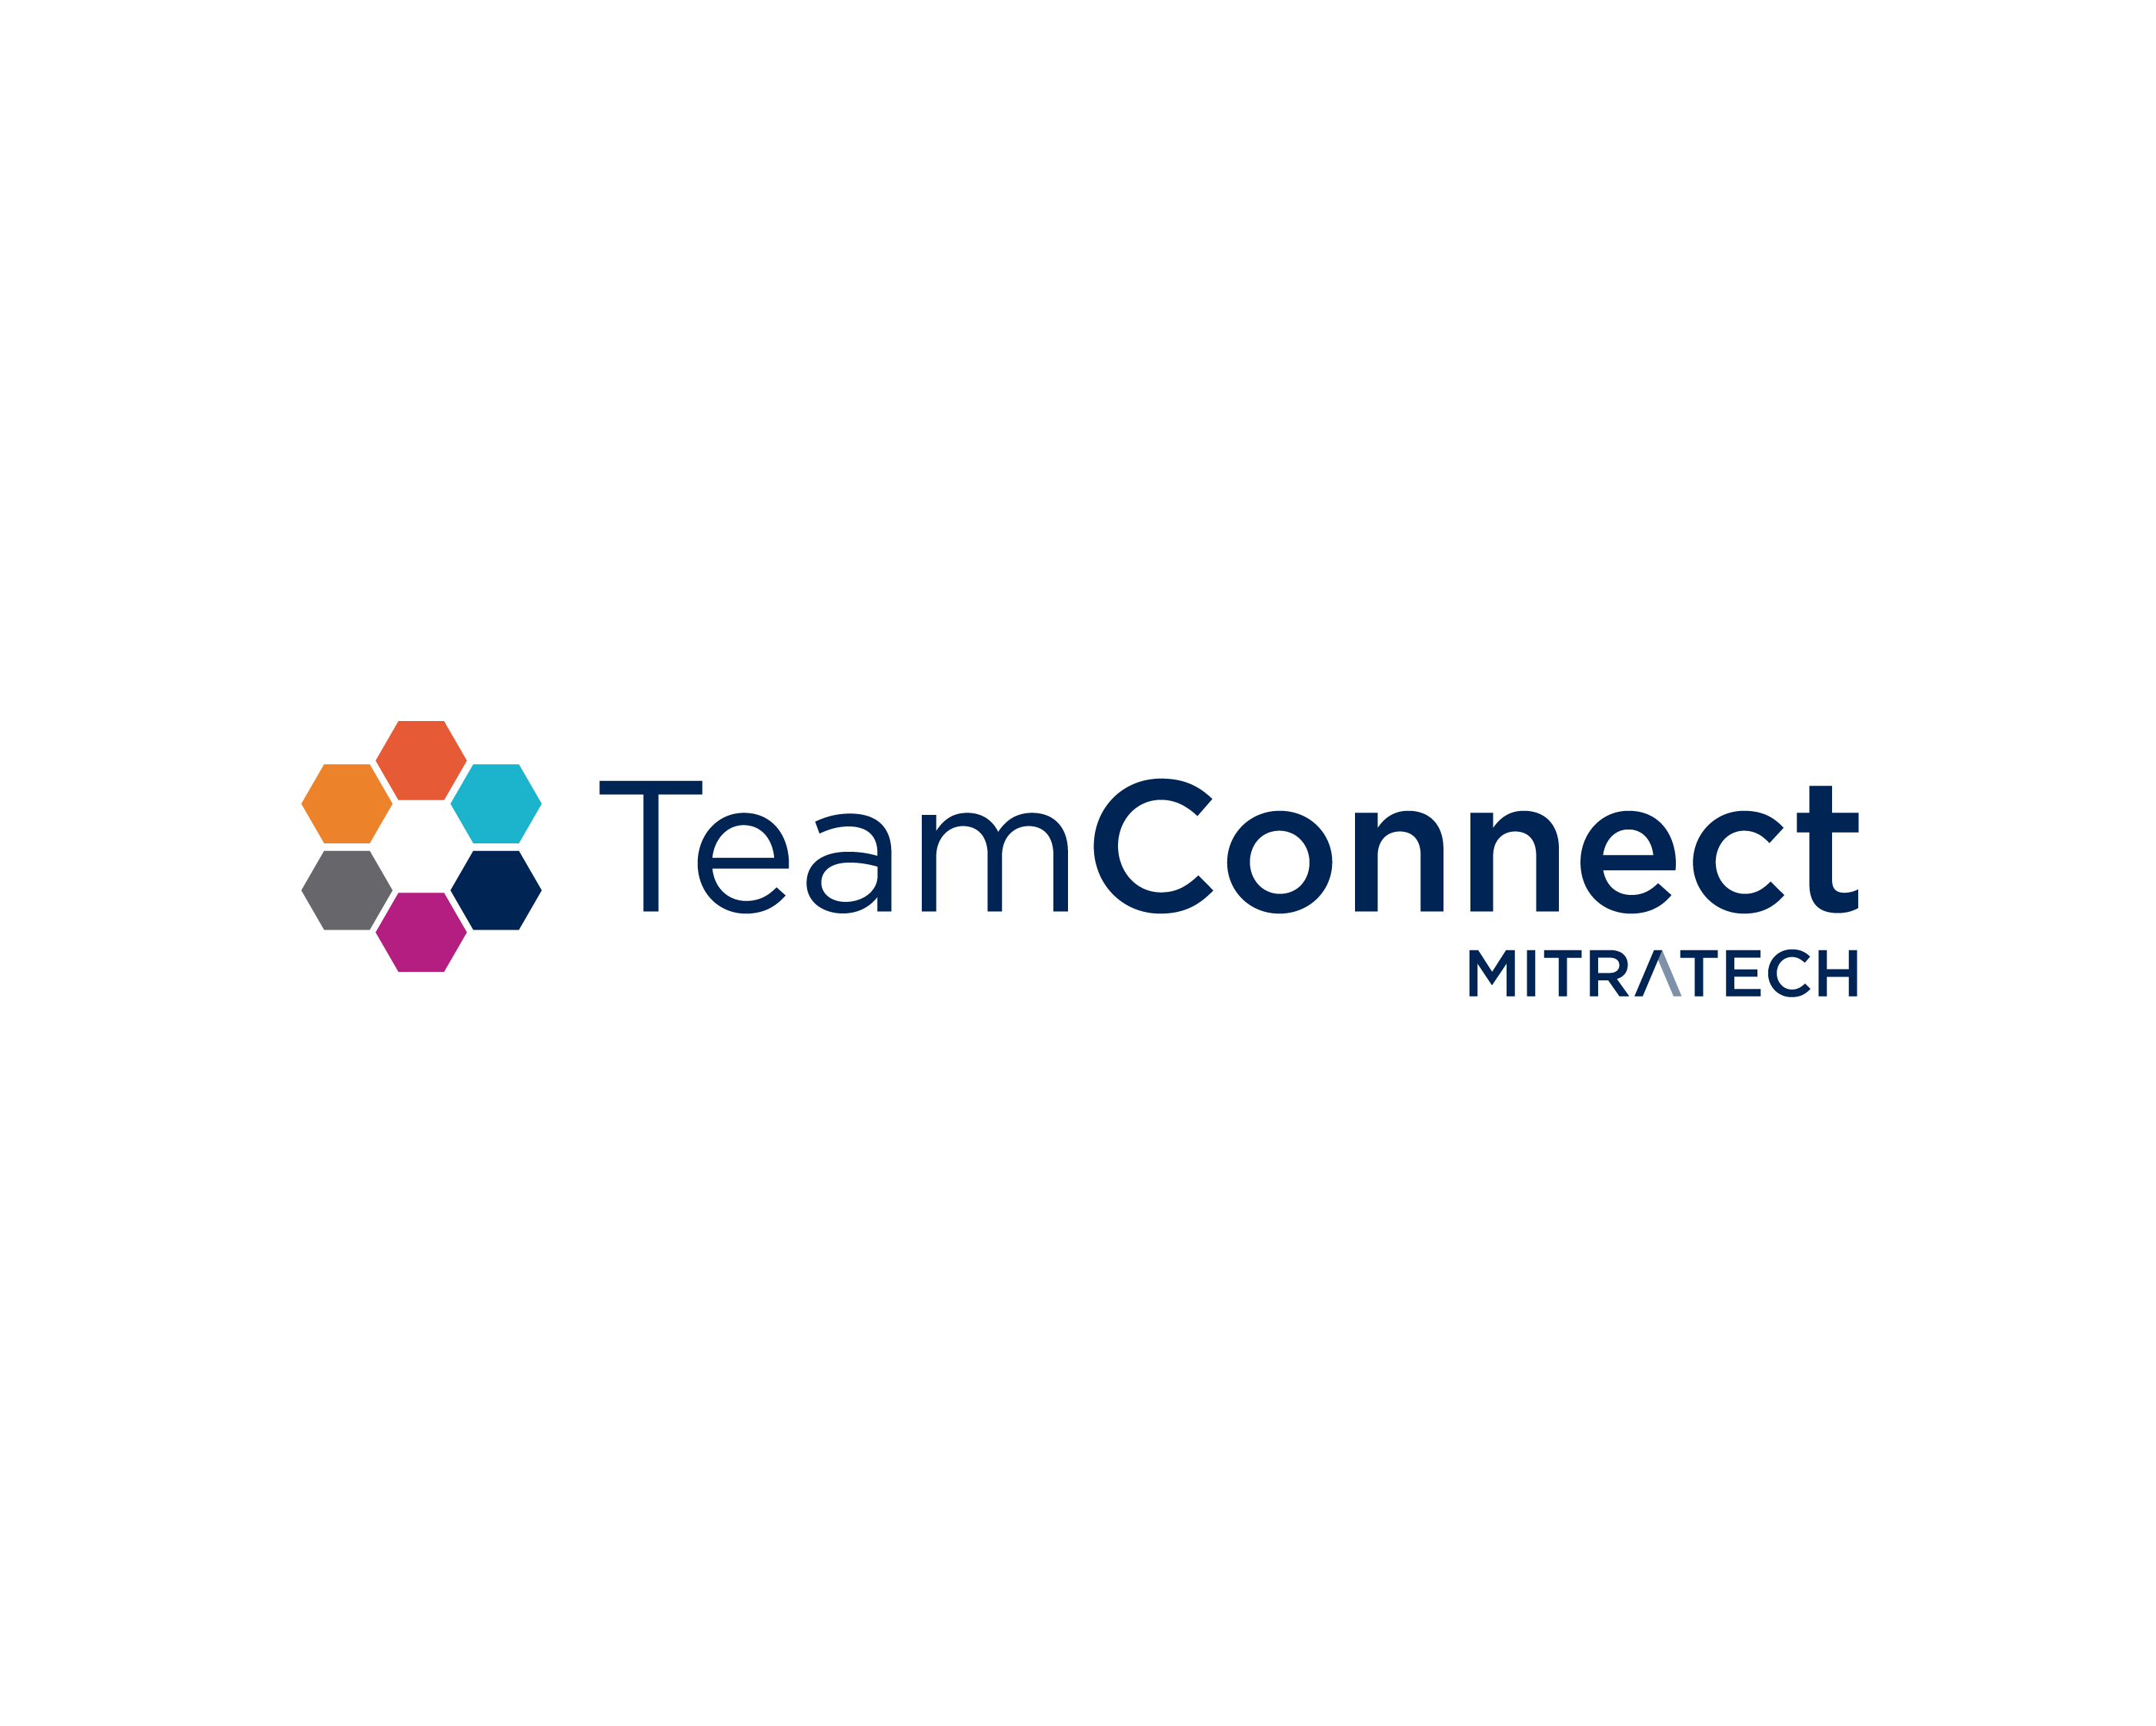 Interact Experience - TeemConnect